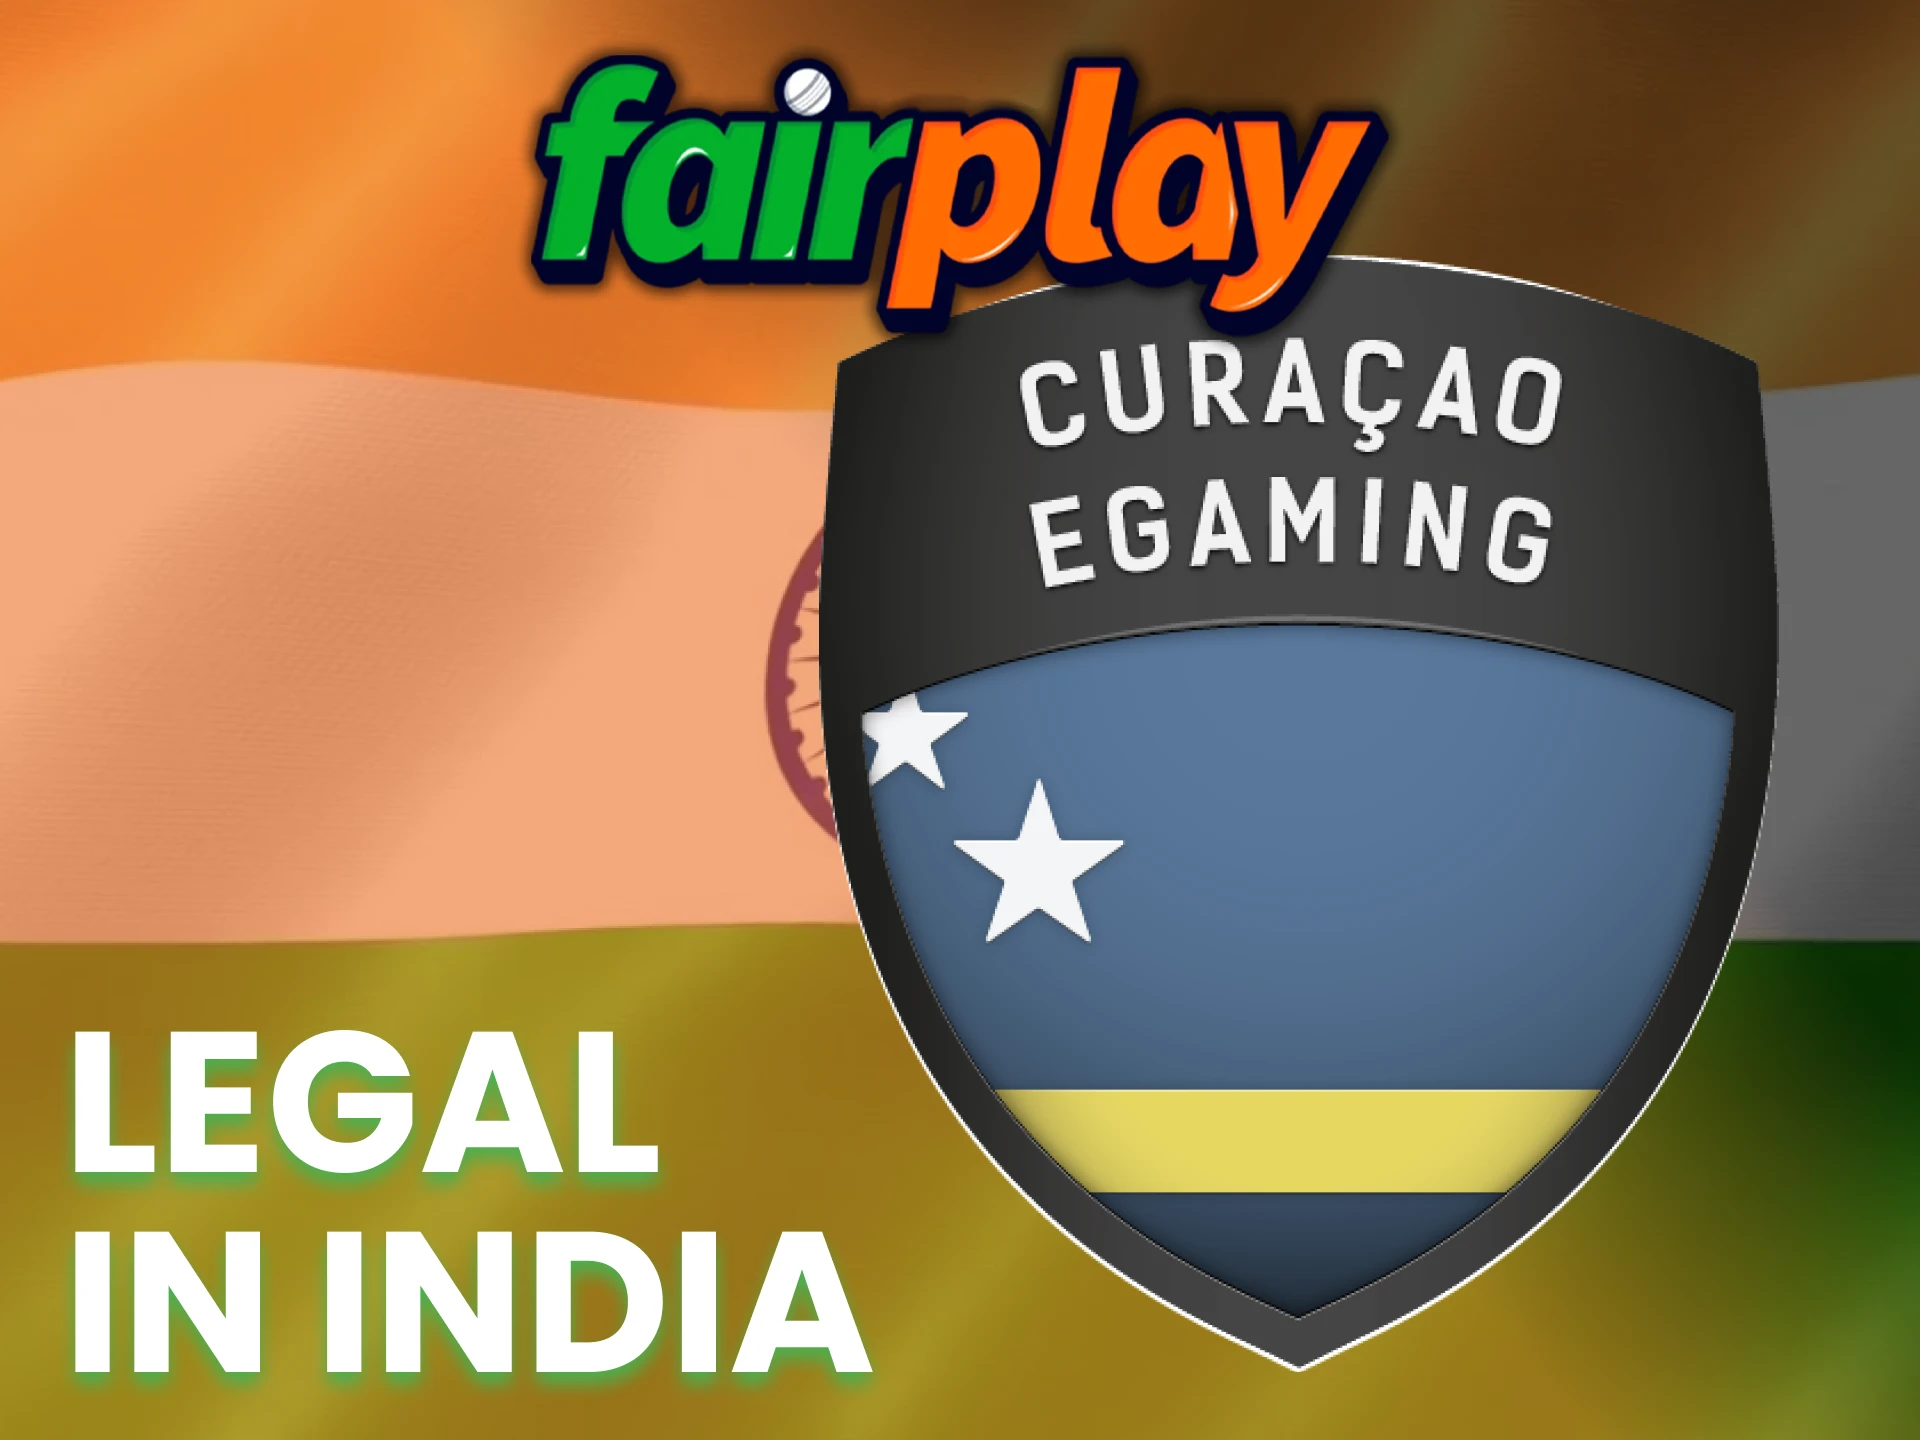 Fairplay is the fully legal betting company.